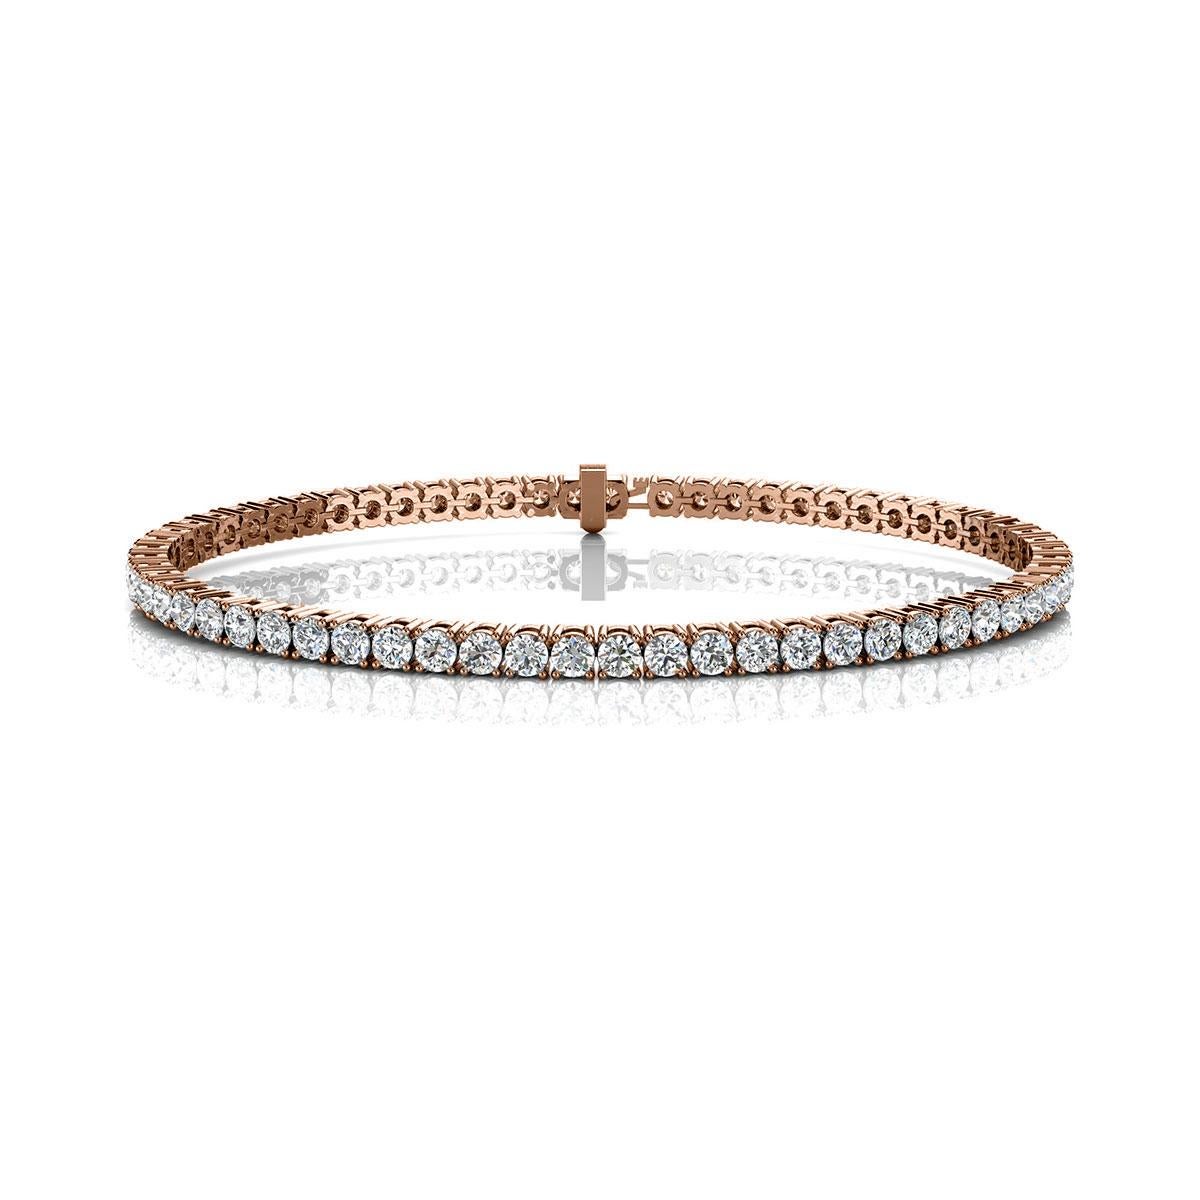 A timeless four prongs diamonds tennis bracelet. Experience the Difference!

Product details: 

Center Gemstone Type: NATURAL DIAMOND
Center Gemstone Color: WHITE
Center Gemstone Shape: ROUND
Center Diamond Carat Weight: 4
Metal: 18K Rose Gold
Metal